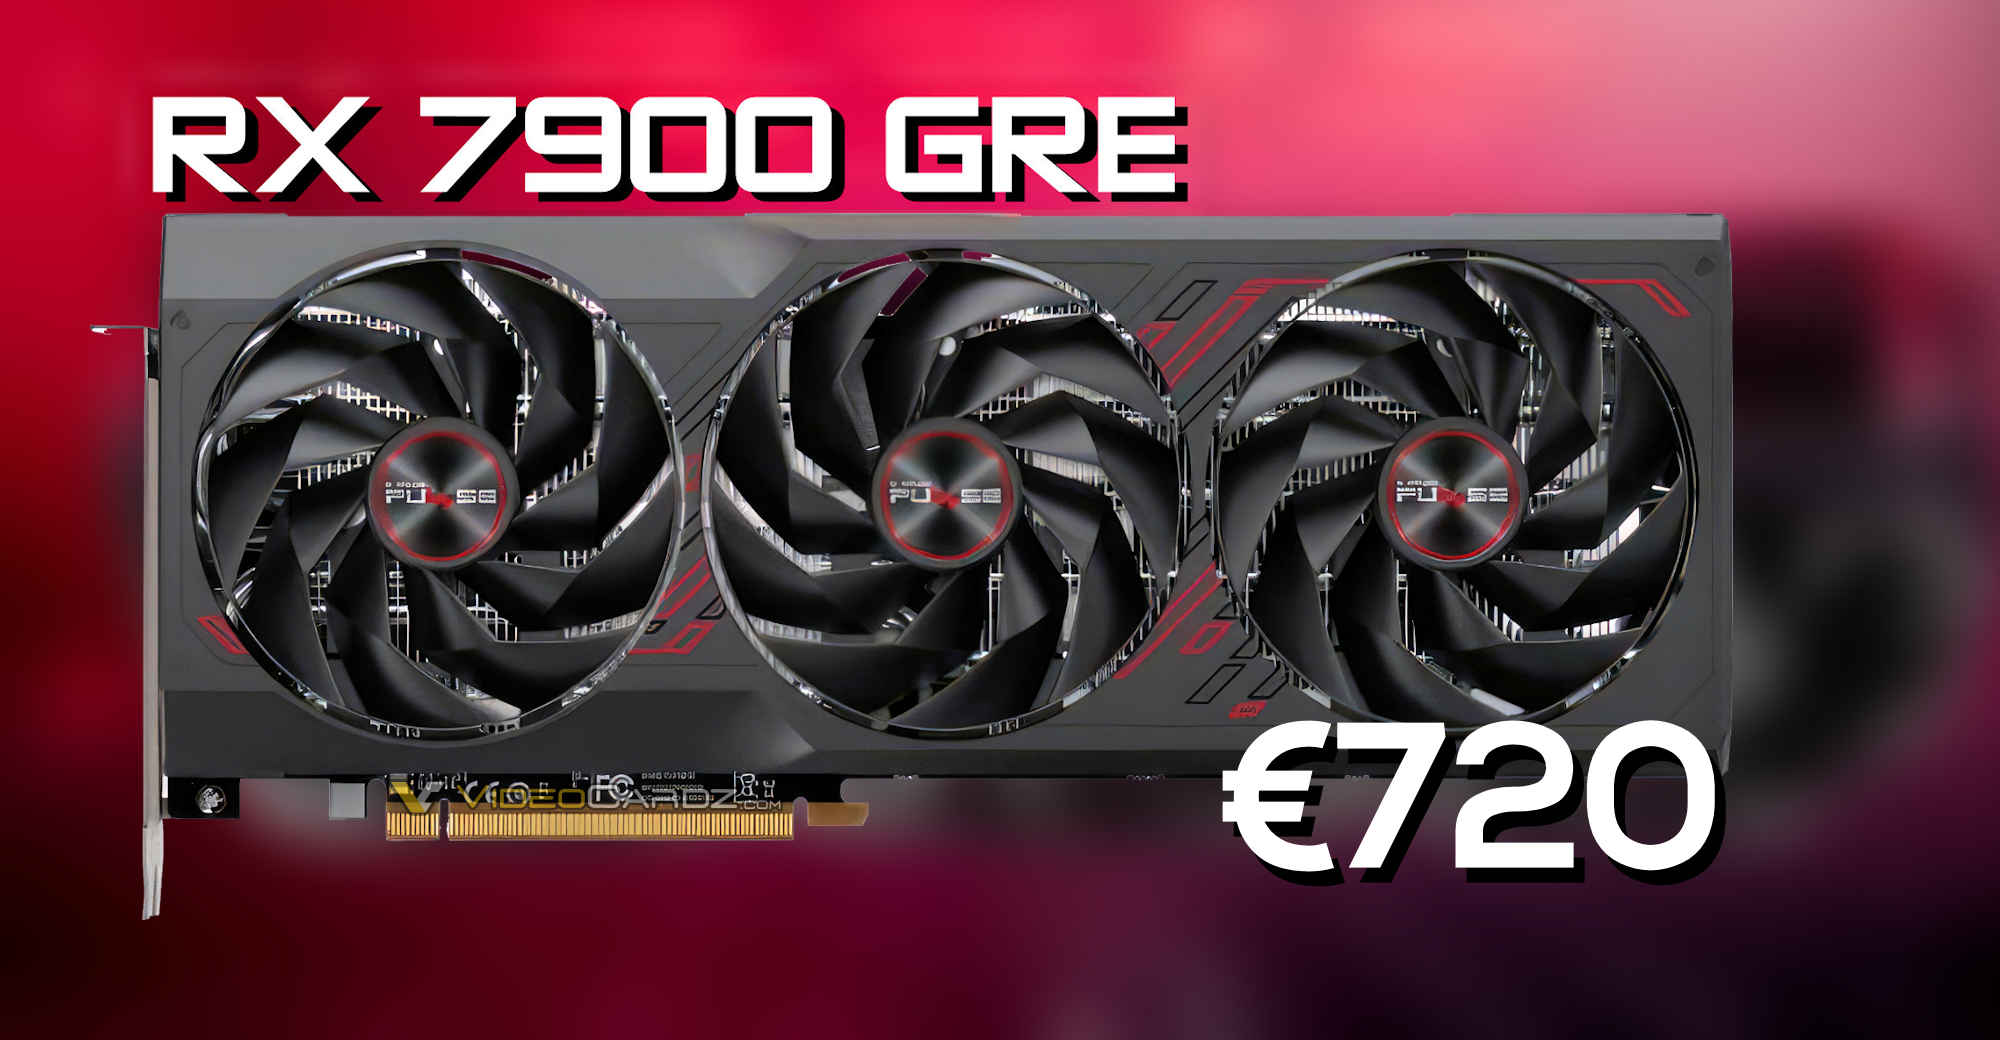 AMD Radeon RX 7900 GRE now available in Europe for 720 EUR, PC